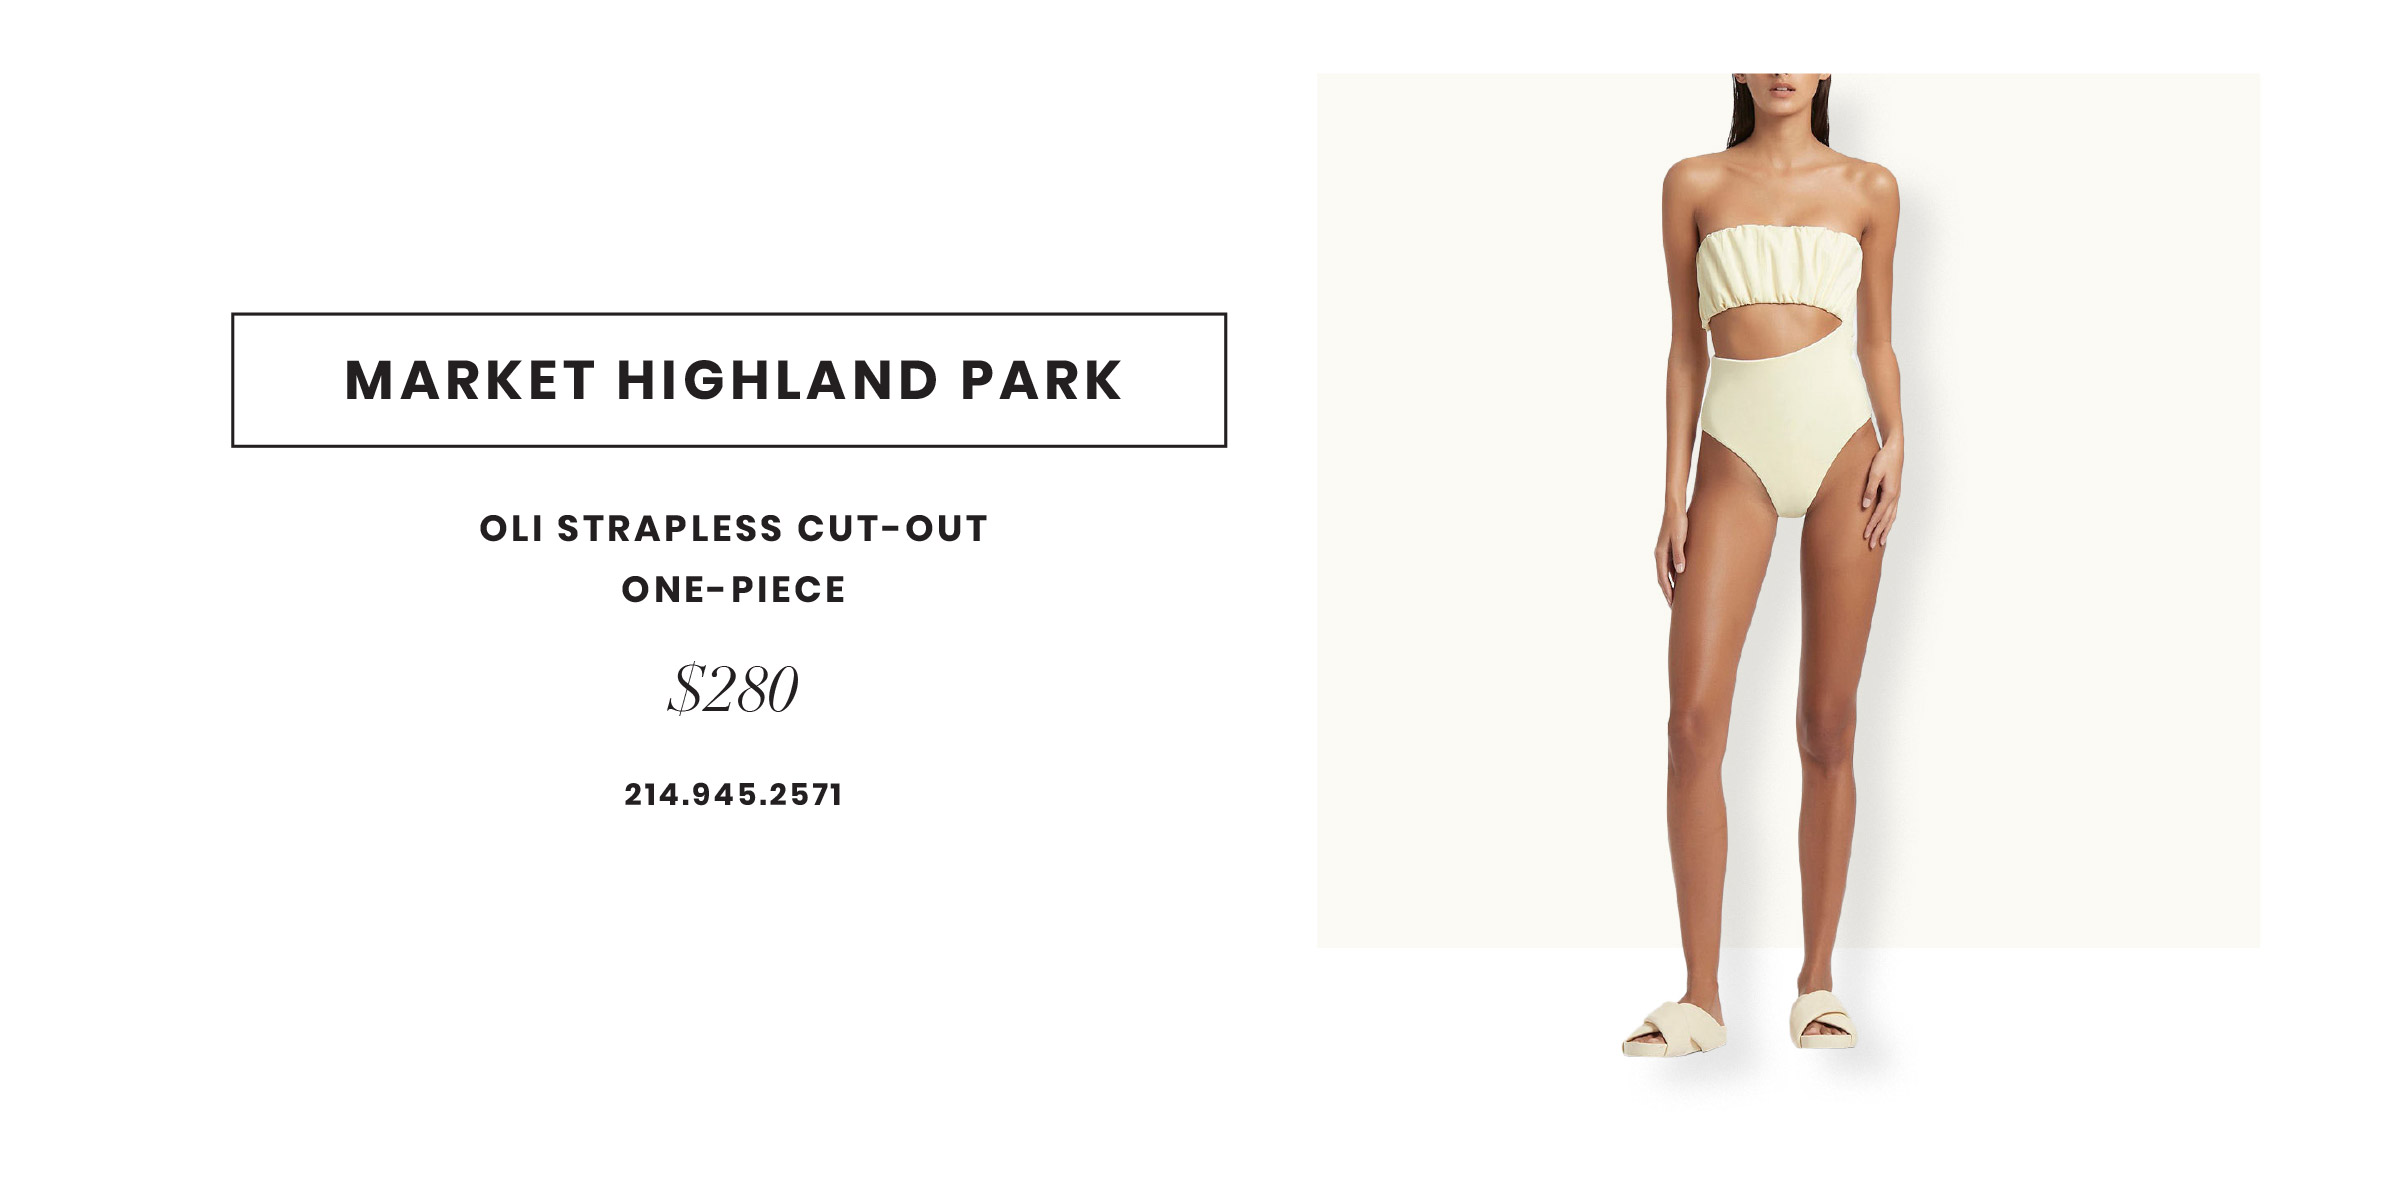 Market Highland Park strapless one piece swimsuit with cut out